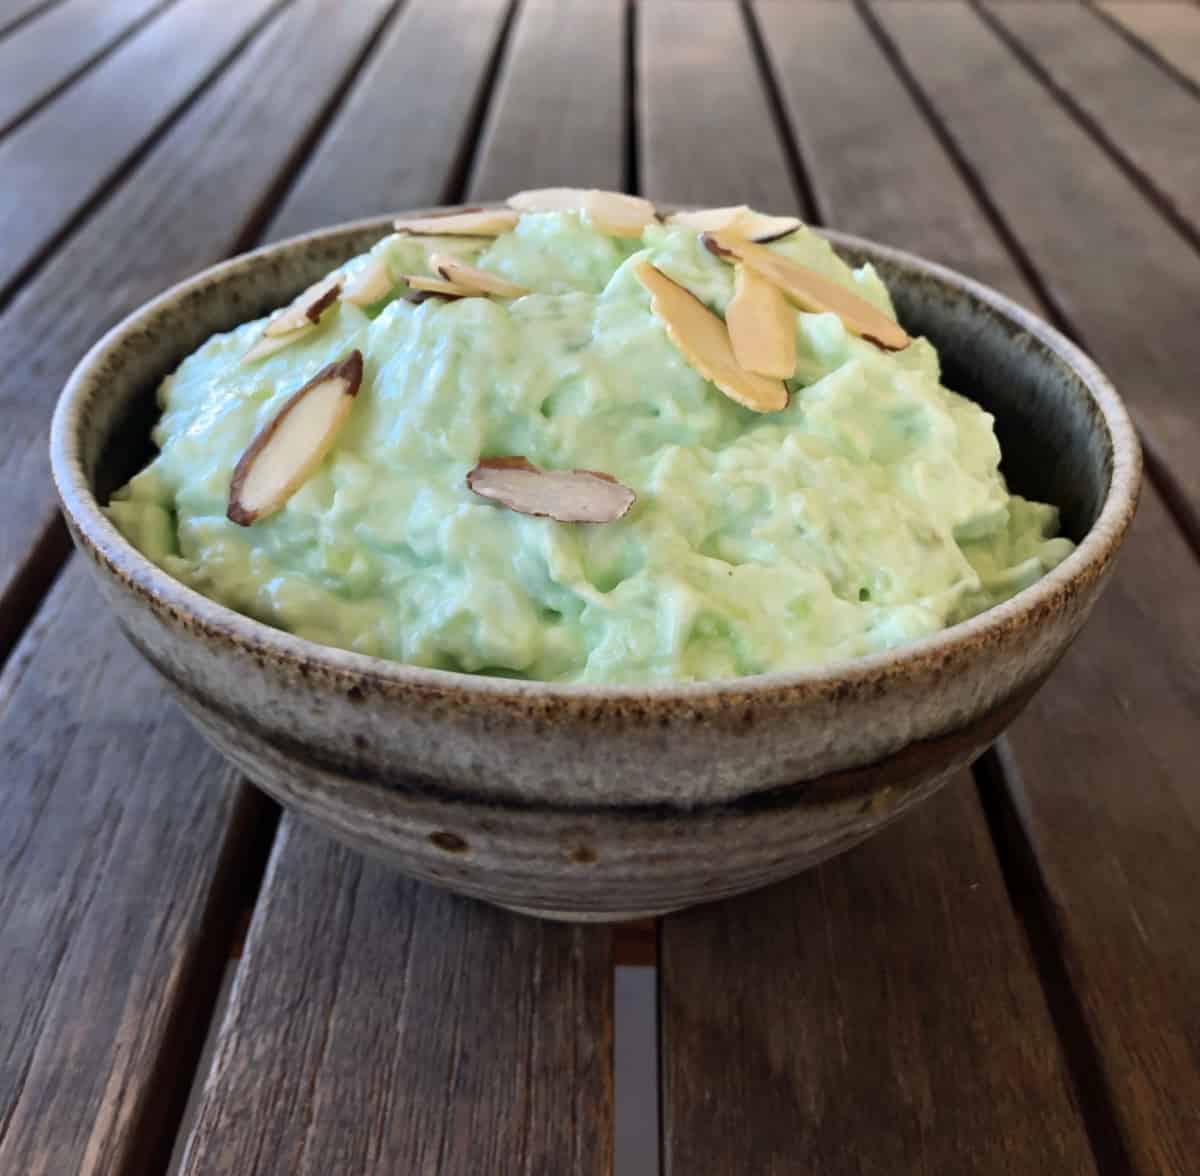 Pistachio fluff topped with sliced almonds in brown bowl.